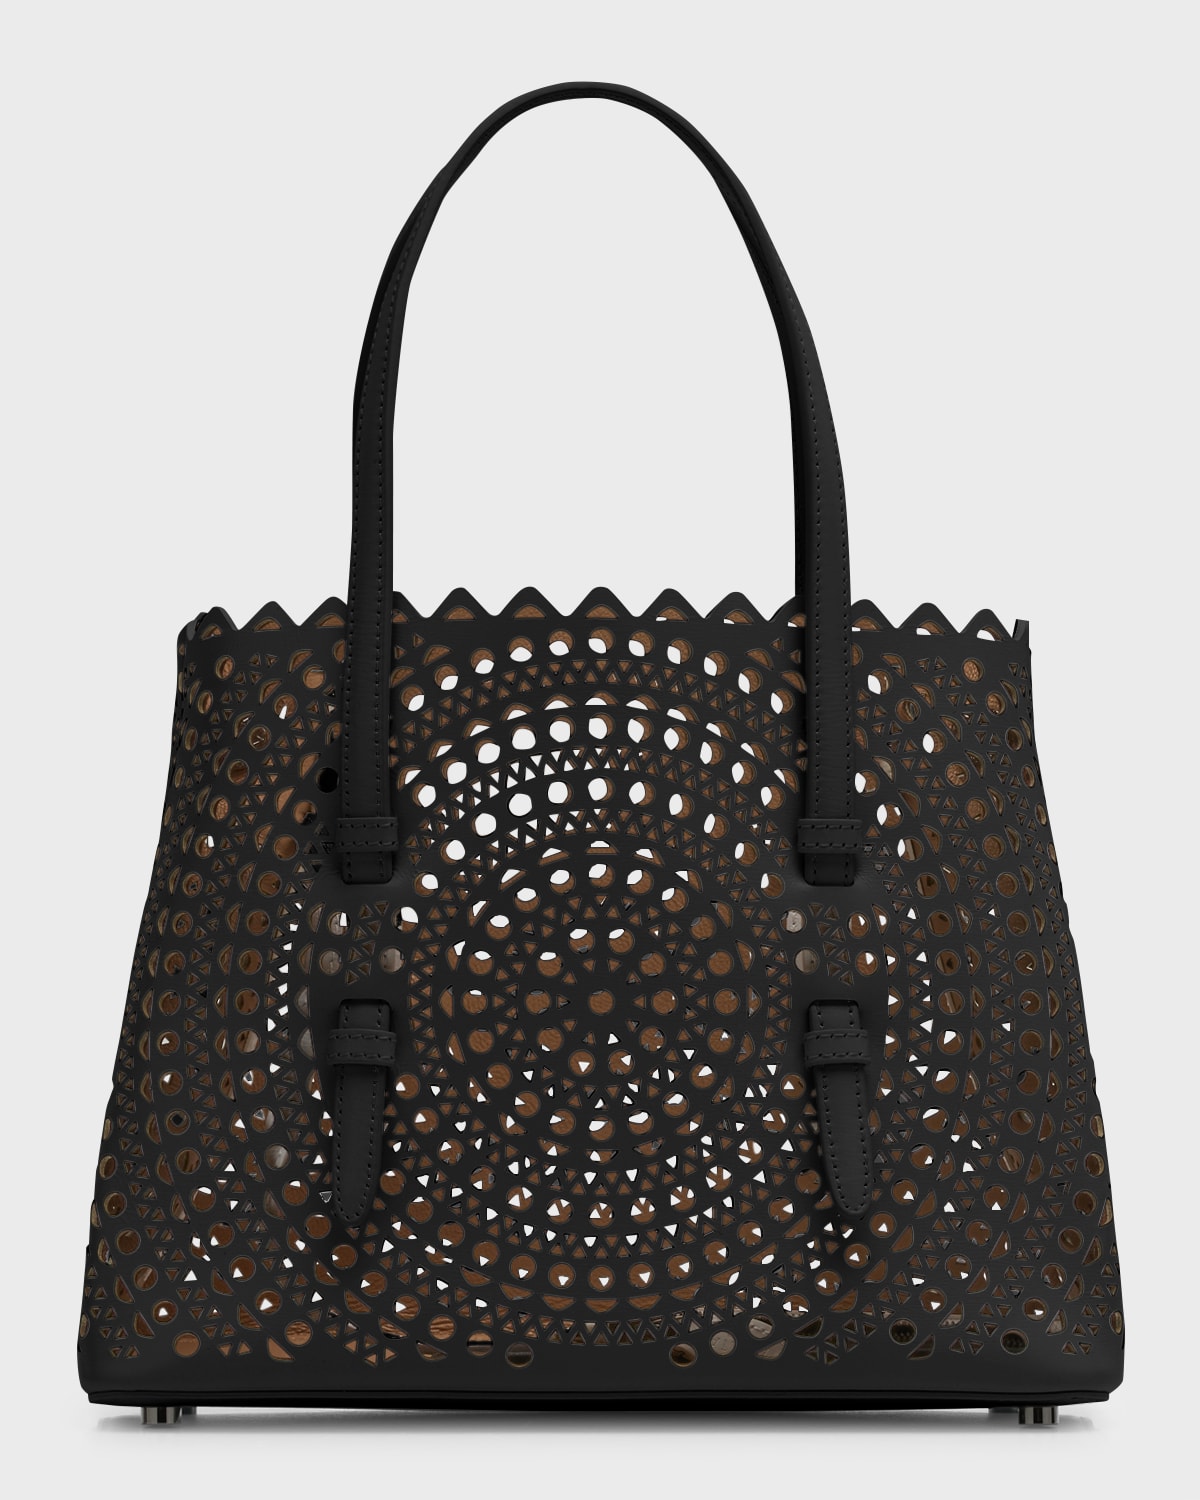 Mina 25 Tote Bag in Vienne Perforated Leather